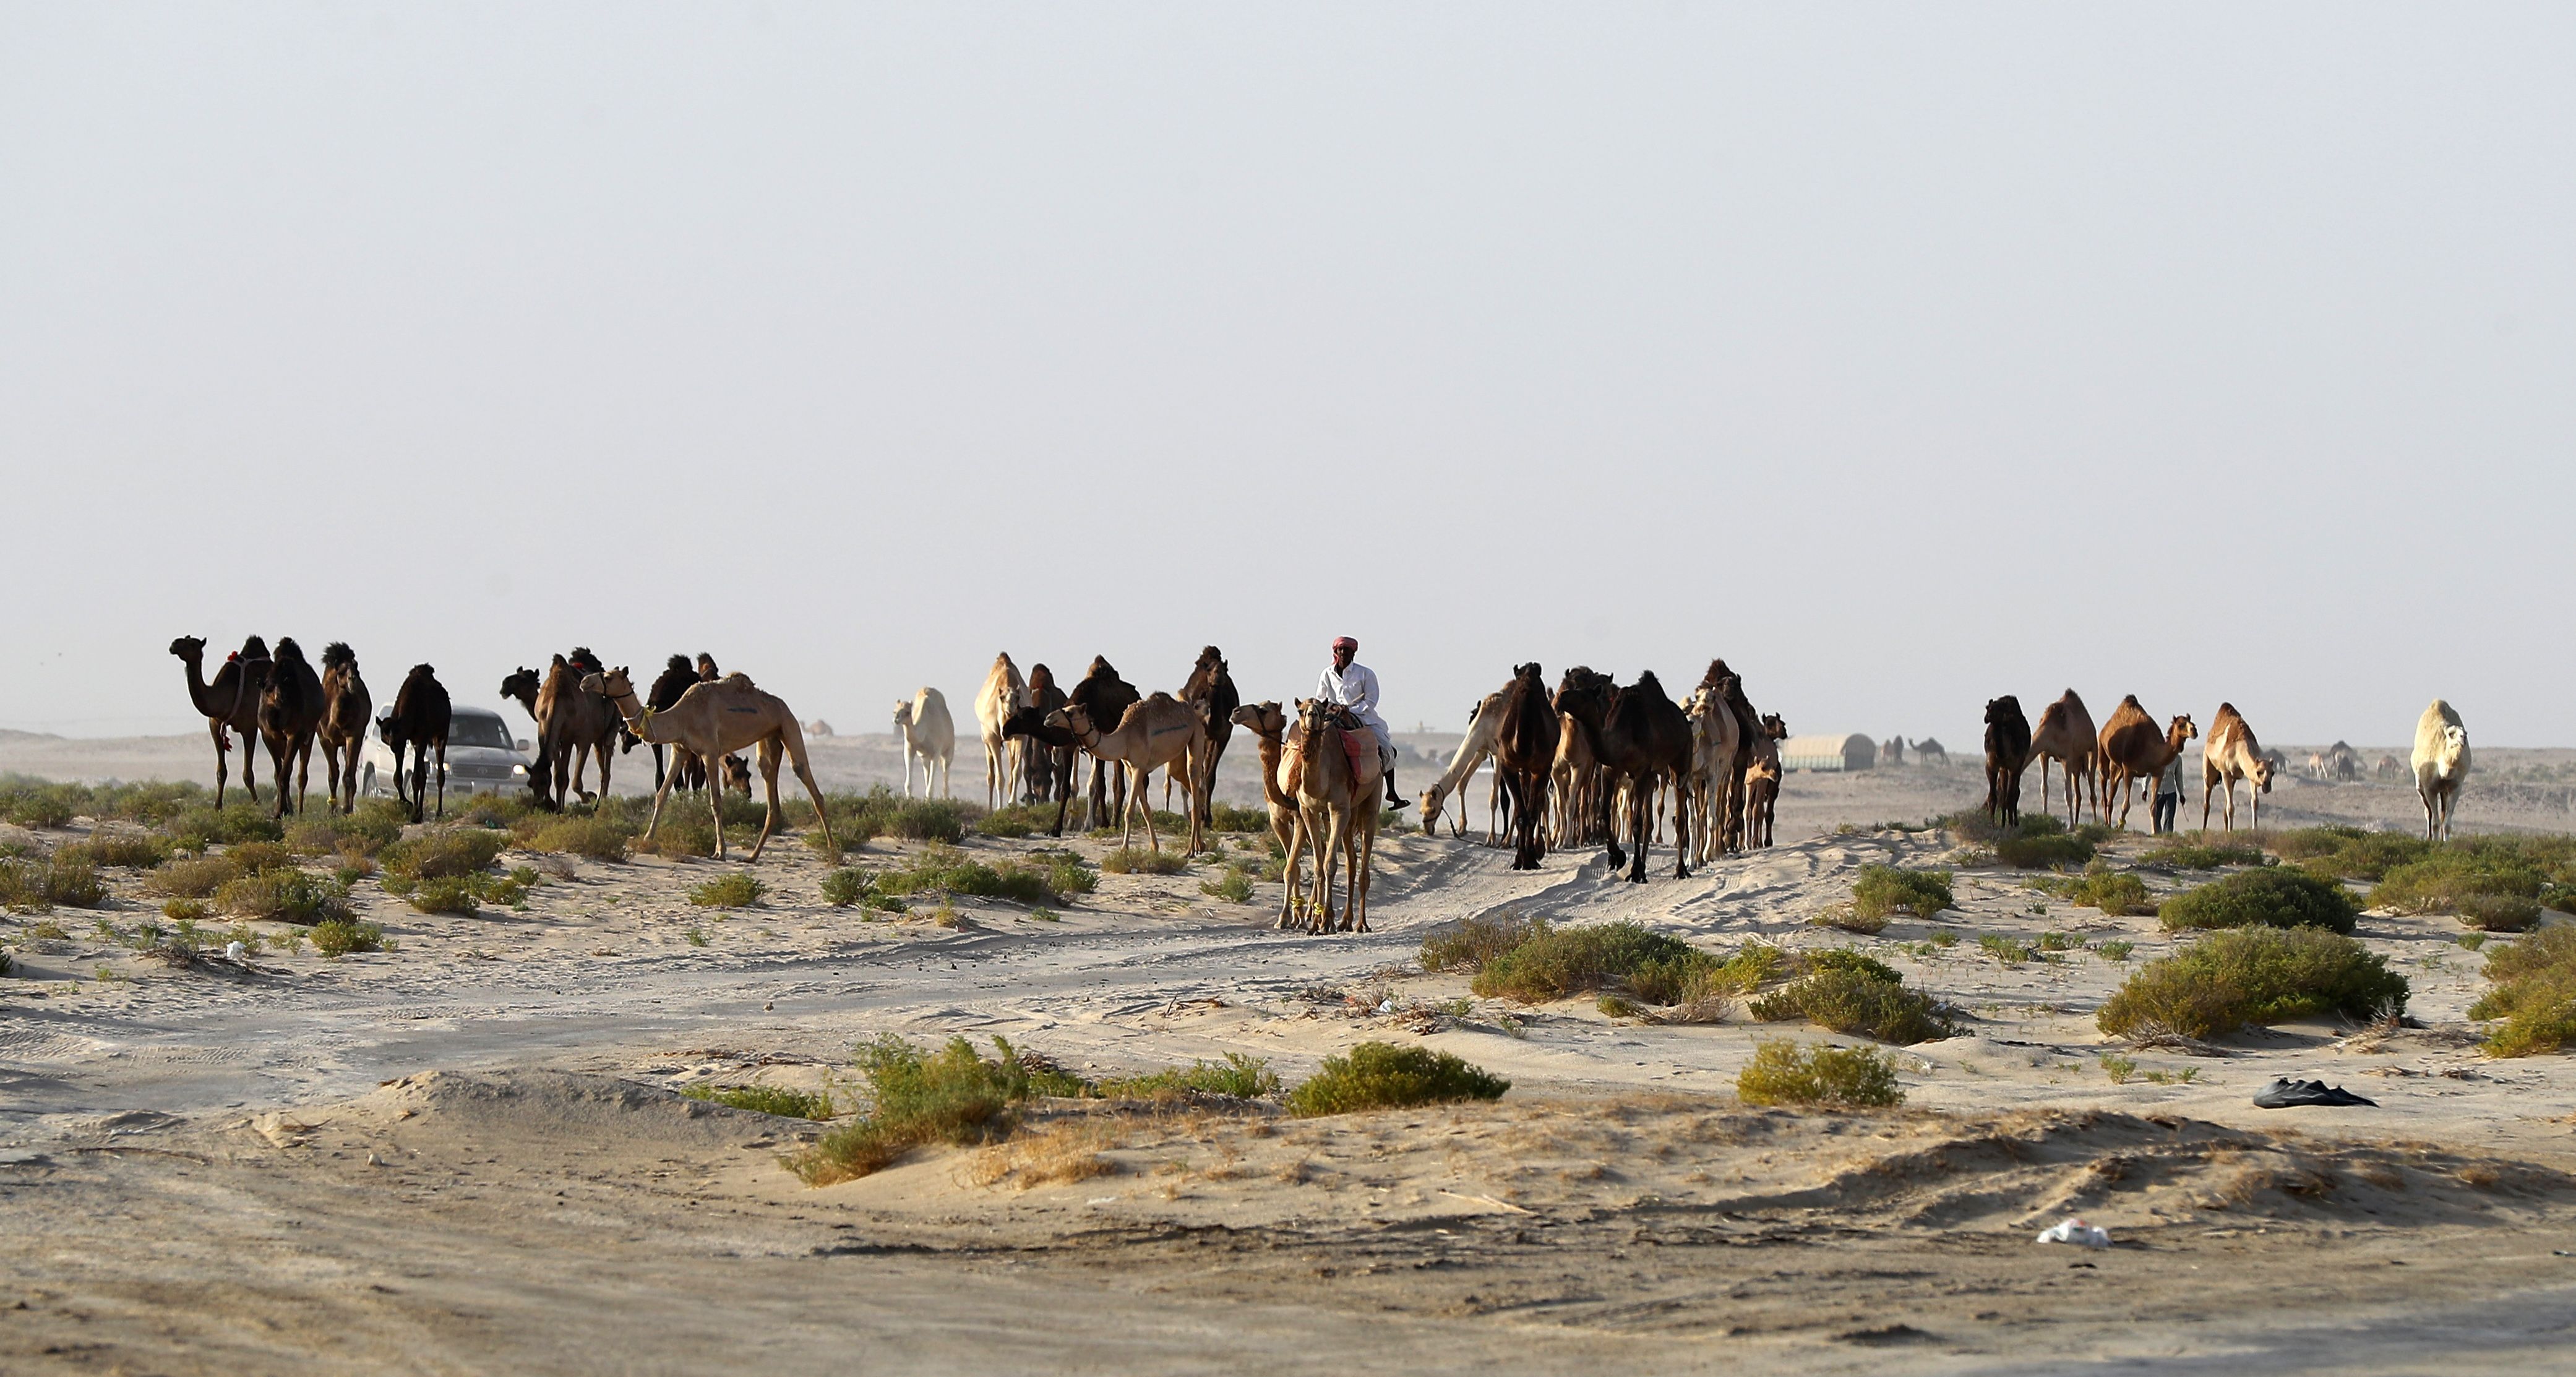 Qatari men herd camels in a desert area on the Qatari side of the Abu Samrah border crossing between Saudi Arabia and Qatar on June 21, 2017. Around 12,000 camels and sheep have become the latest victims of the Gulf diplomatic crisis, being forced to trek back to Qatar from Saudi Arabia, a newspaper reported Tuesday. / AFP PHOTO / KARIM JAAFAR